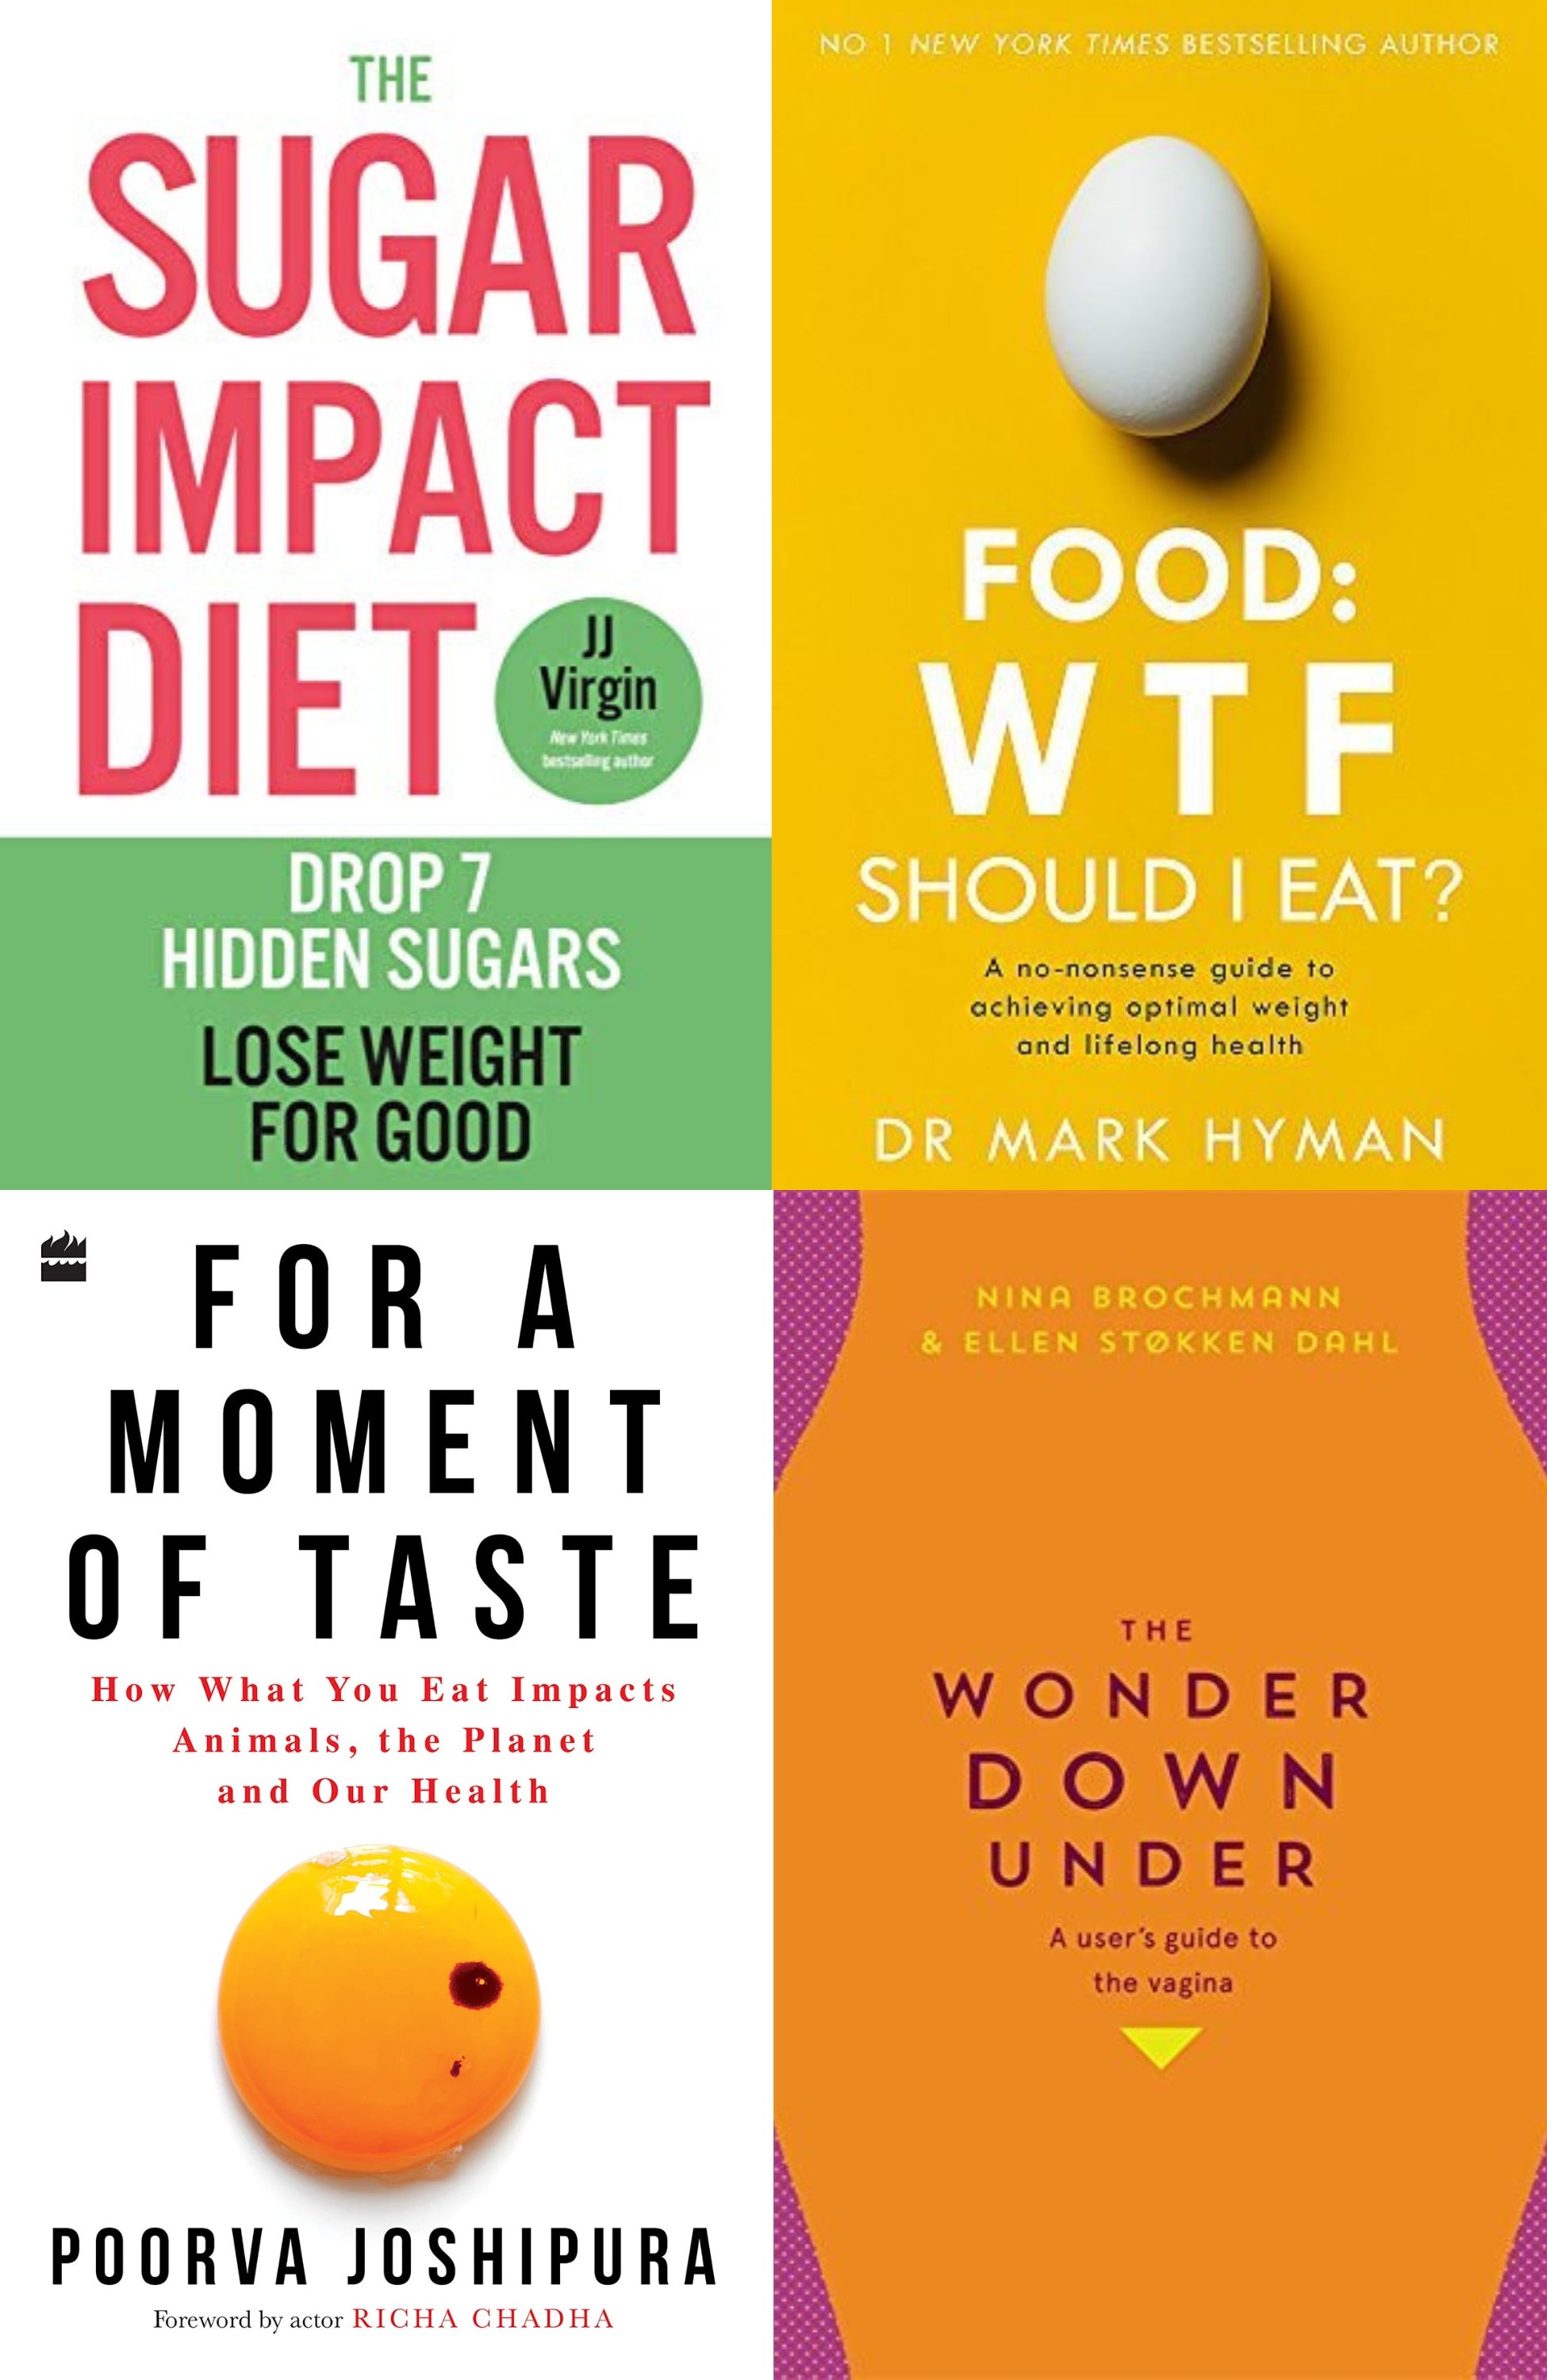 Lifestyle &amp; Health Non Fiction Bestseller Book Combo ( For a Moment of Taste, Food: WTF Should I Eat?, Sugar Impact Diet, The Wonder Down Under )